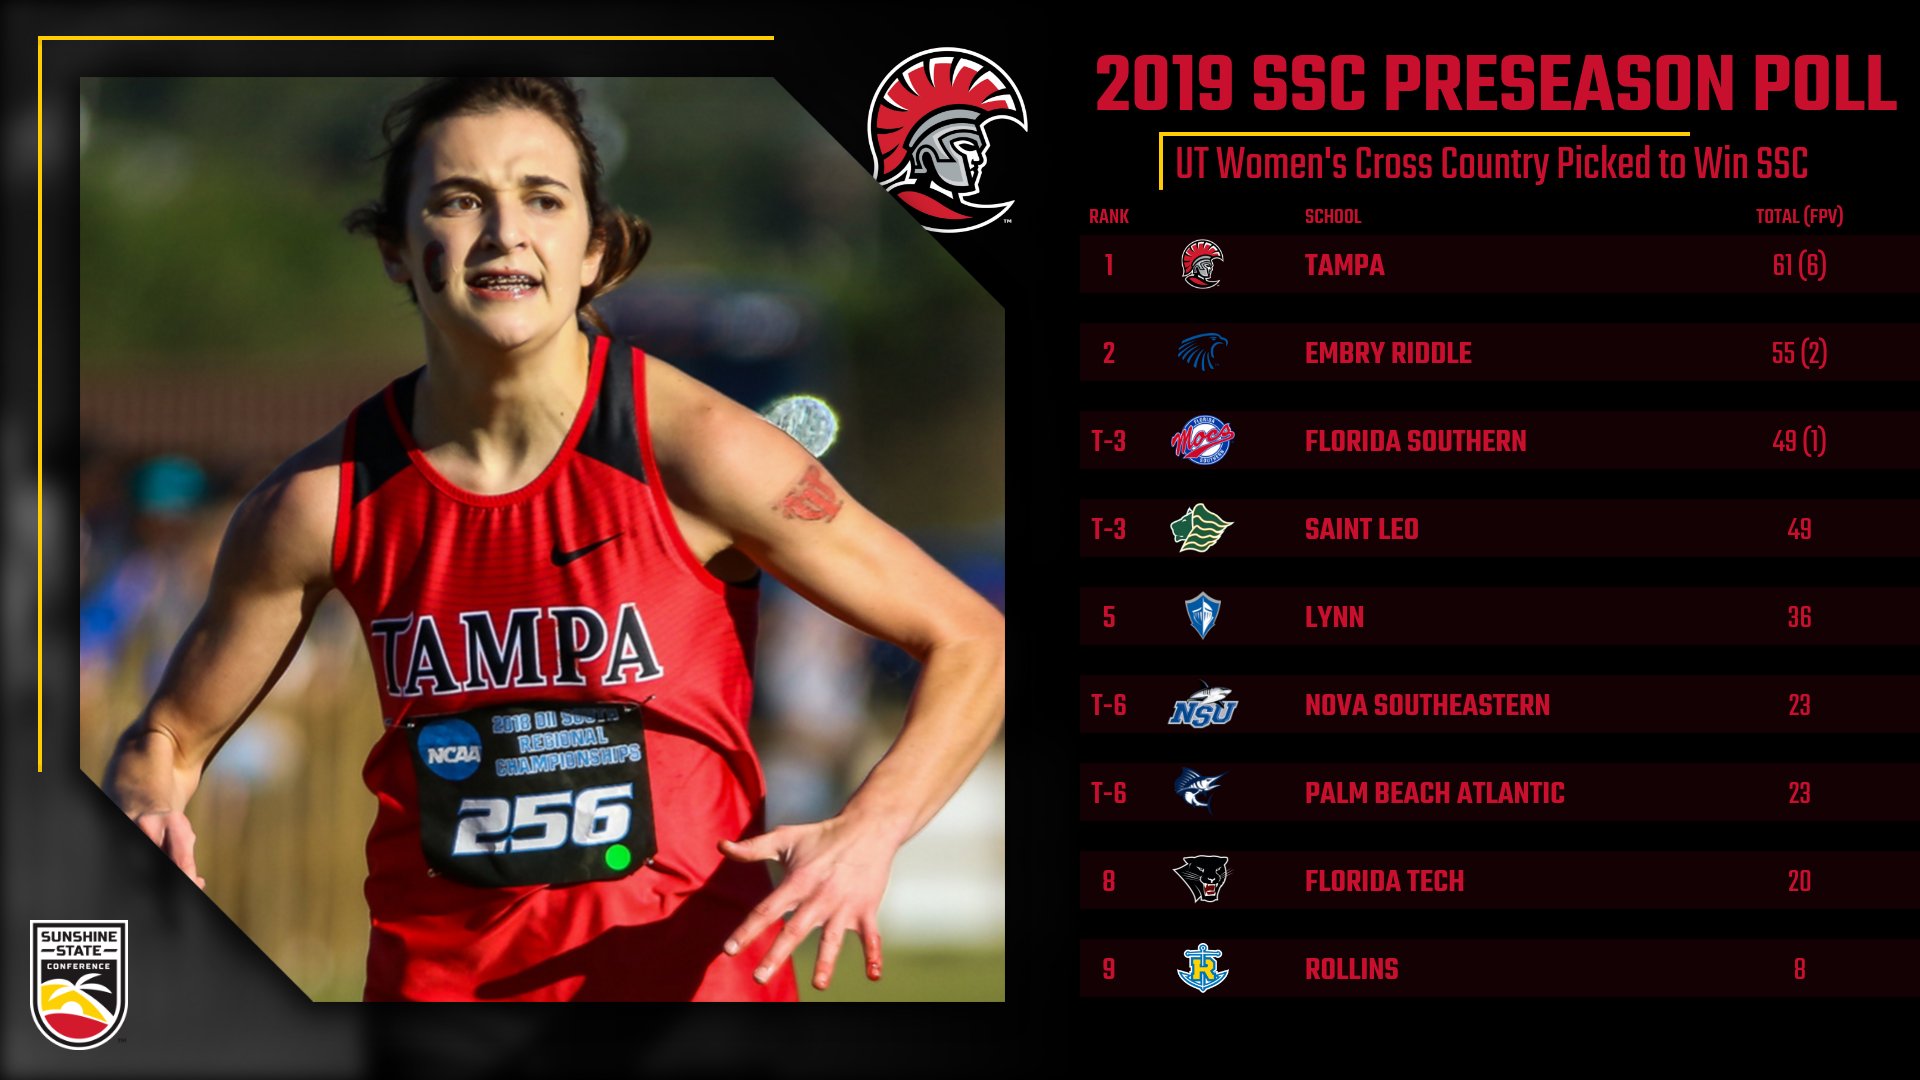 Tampa Picked to Win SSC Women's Cross Country Title